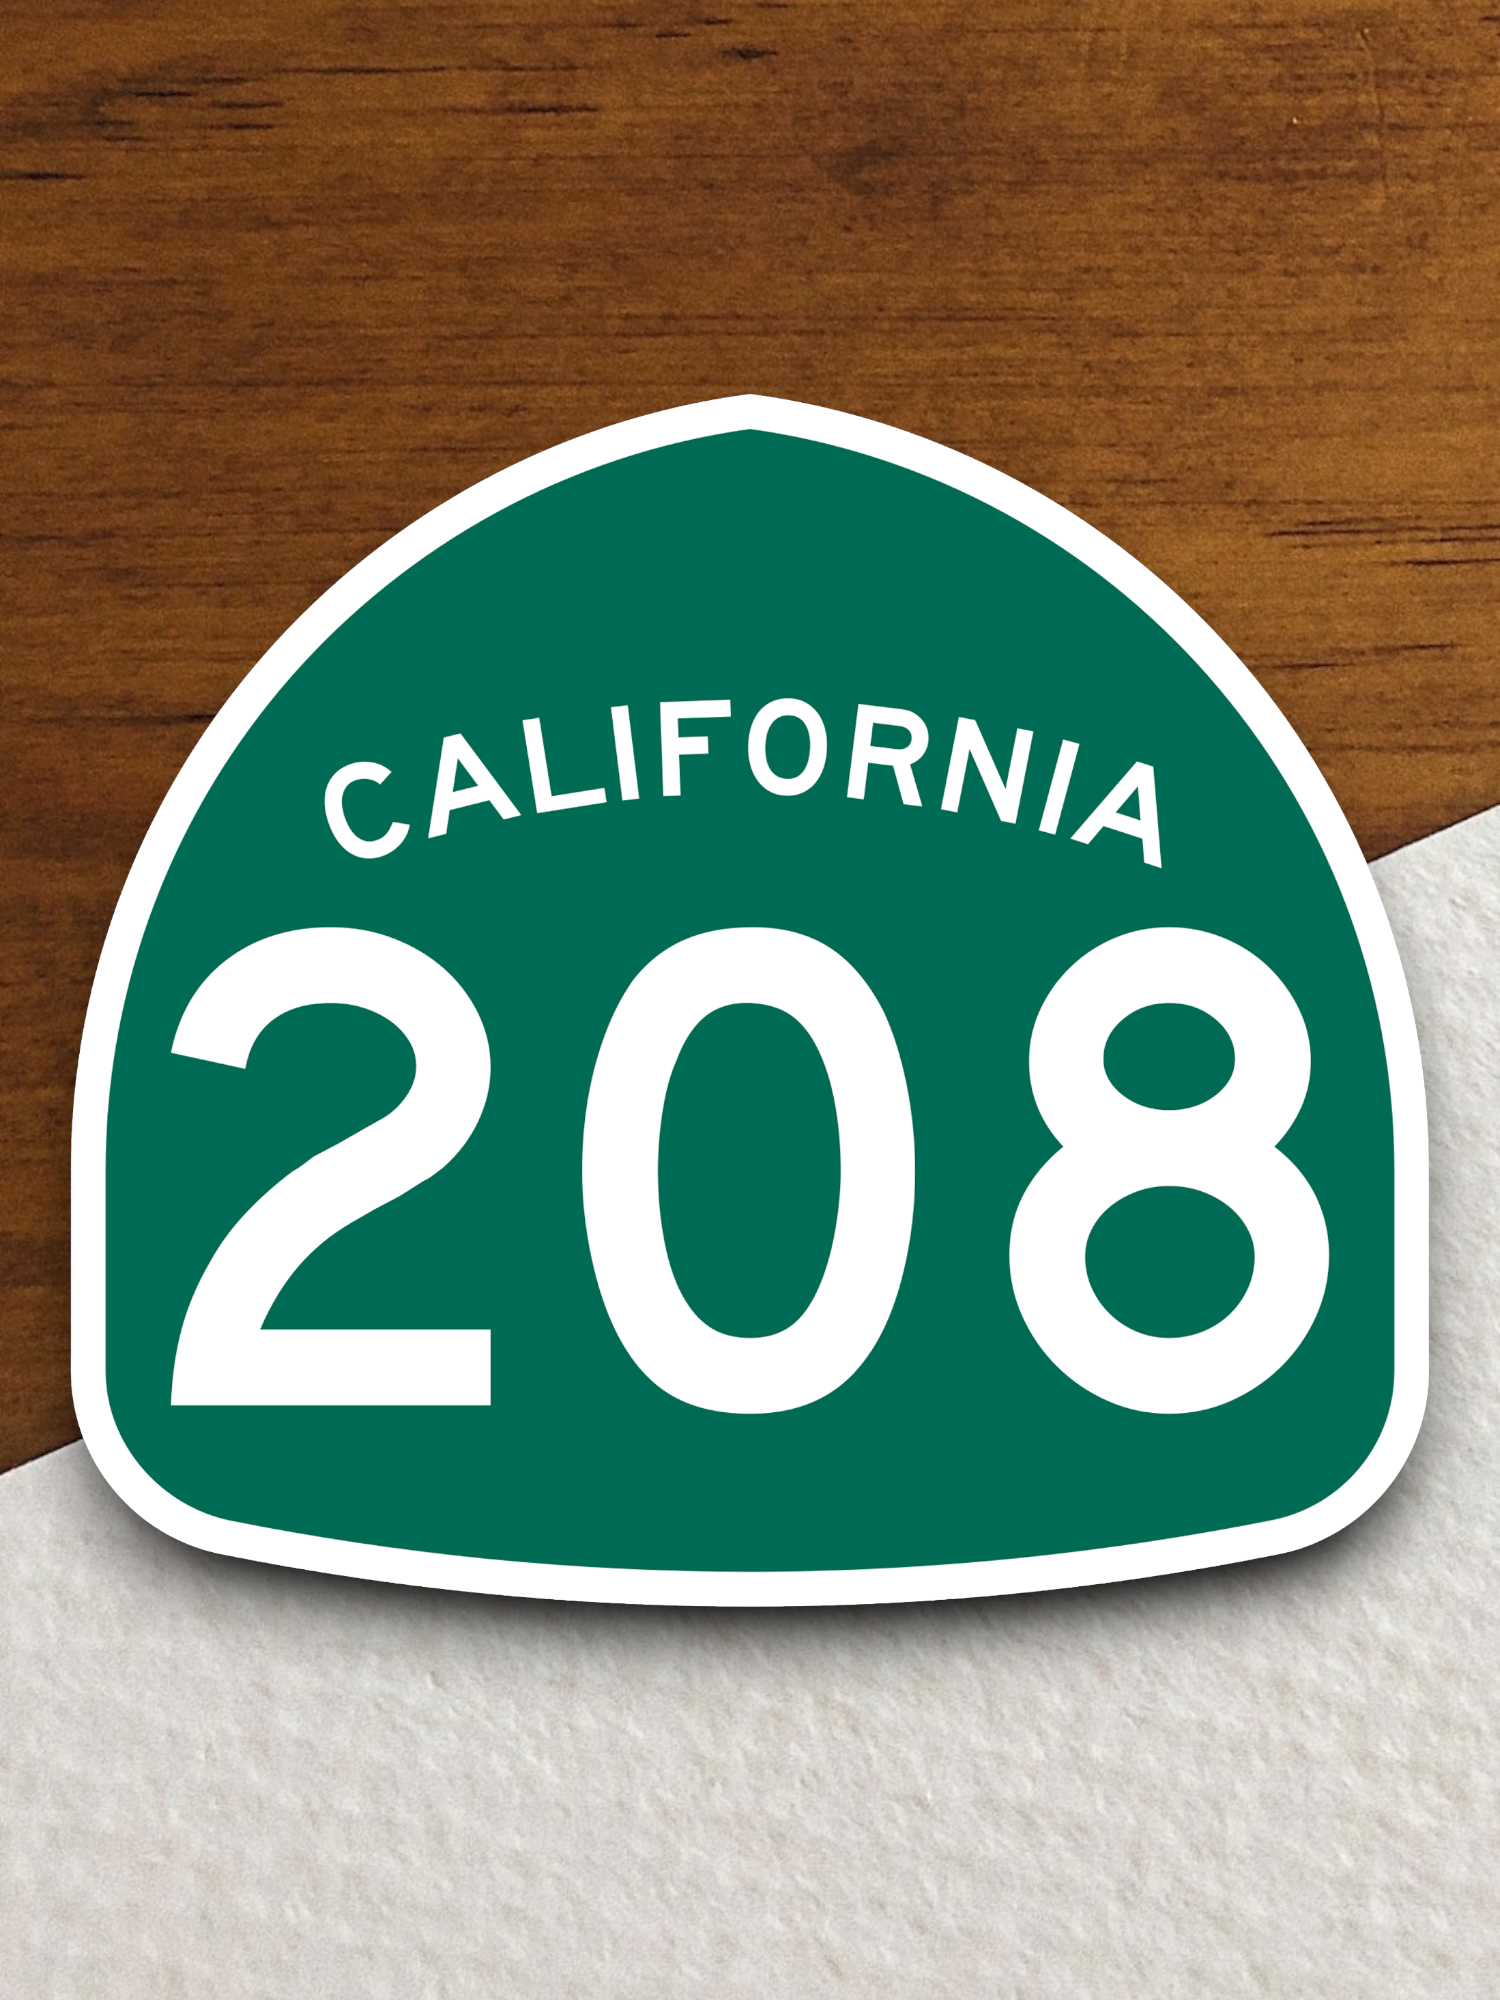 California State Route 208 Road Sign Sticker